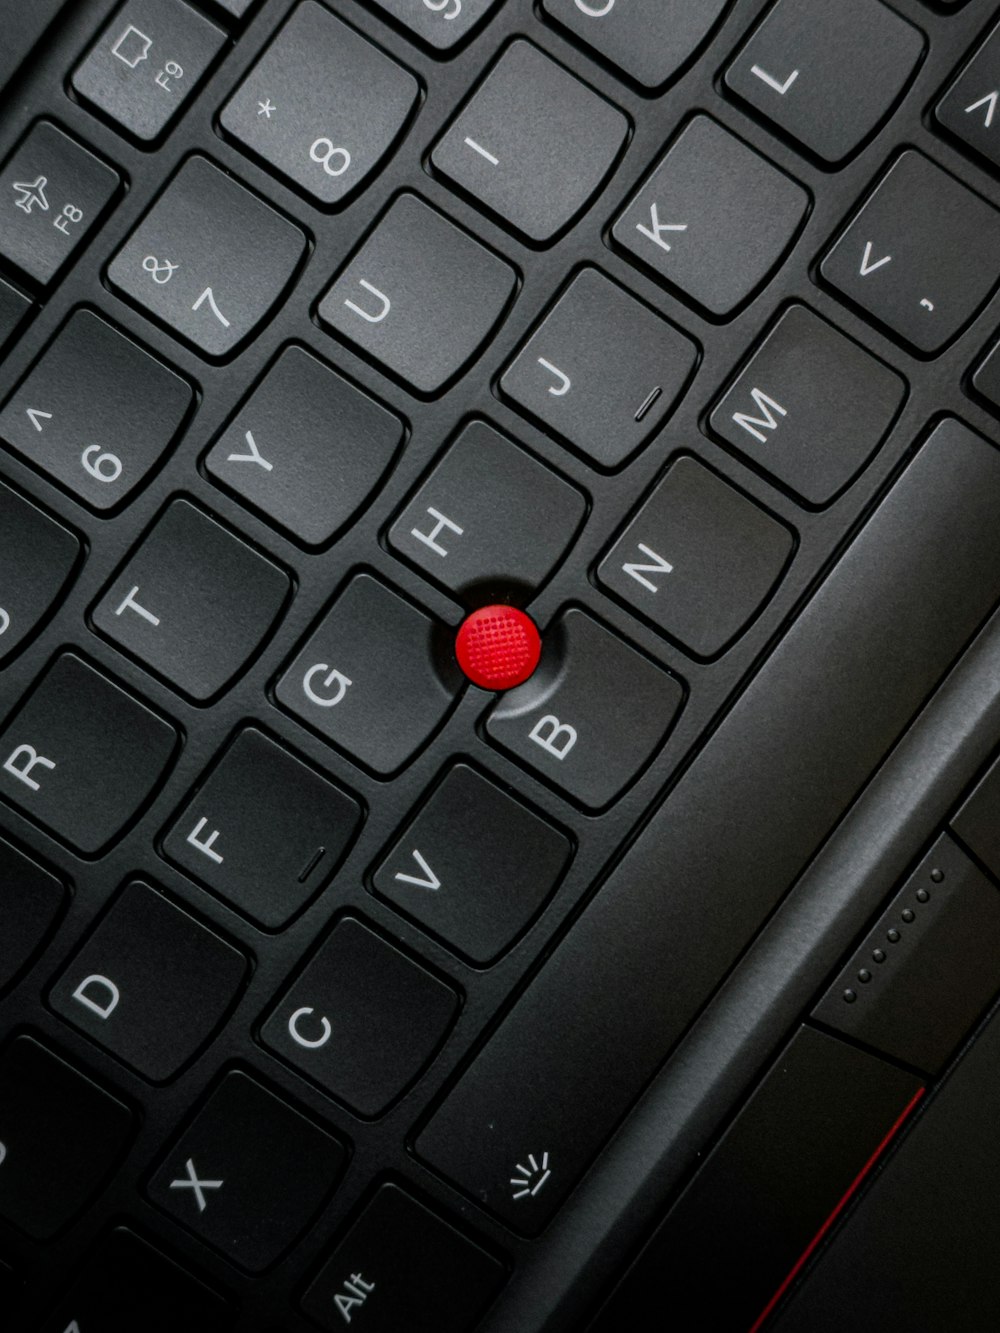 a close up of a keyboard with a red button